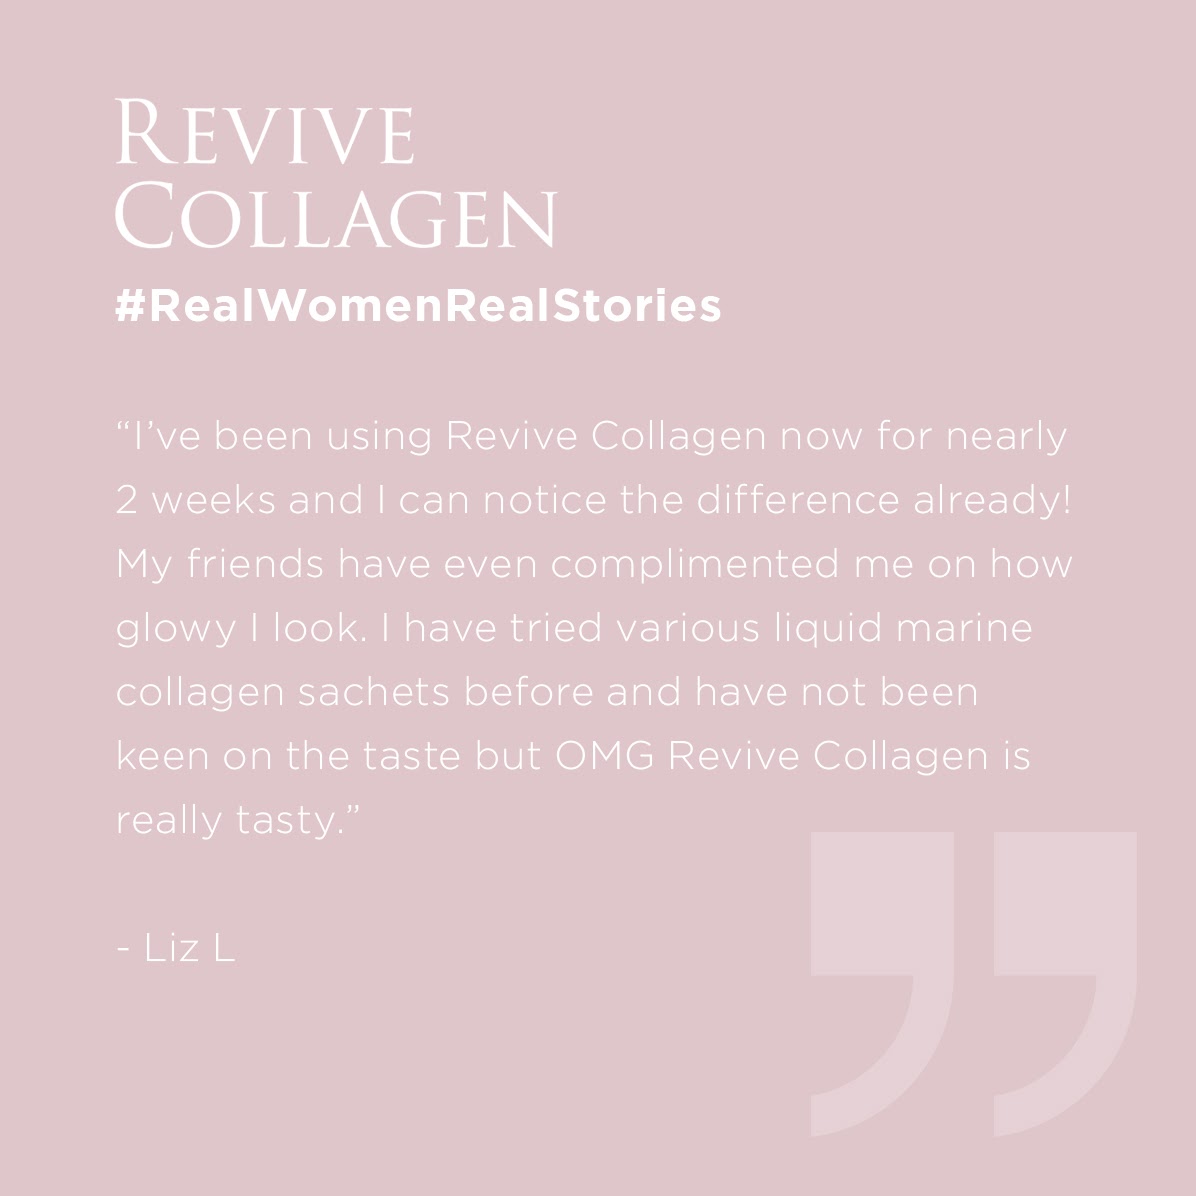 The reviews are in and Revive Collagen is an all-time favourite for its tasty citrus flavour and glowing results. Read more Revive Collagen reviews at revivecollagen.com